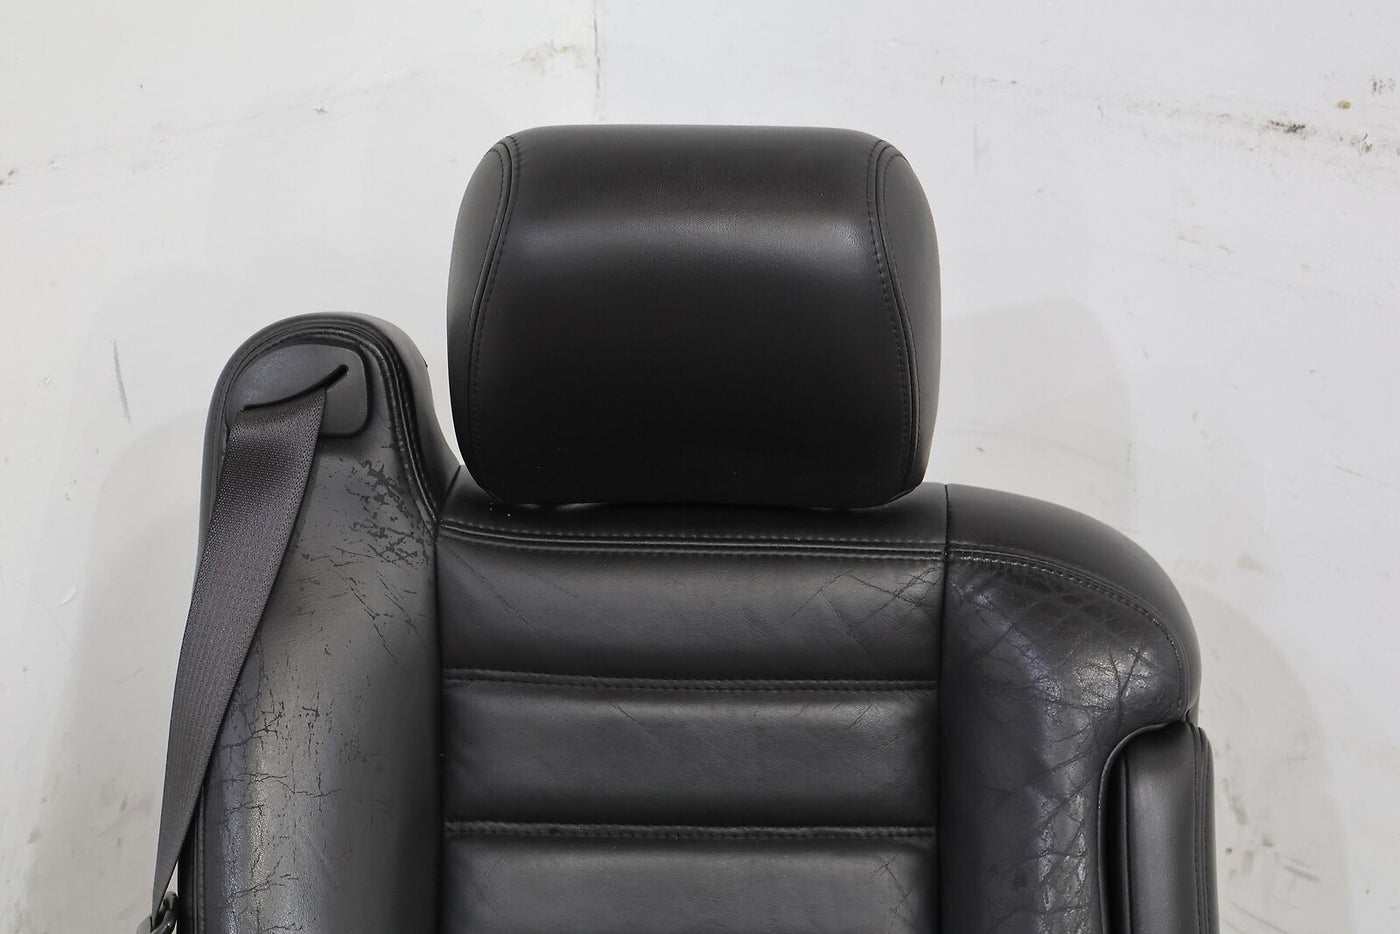 05-07 Hummer H2 Front Right RH Leather Seat (Ebony 482) Power Tested Mild Wear